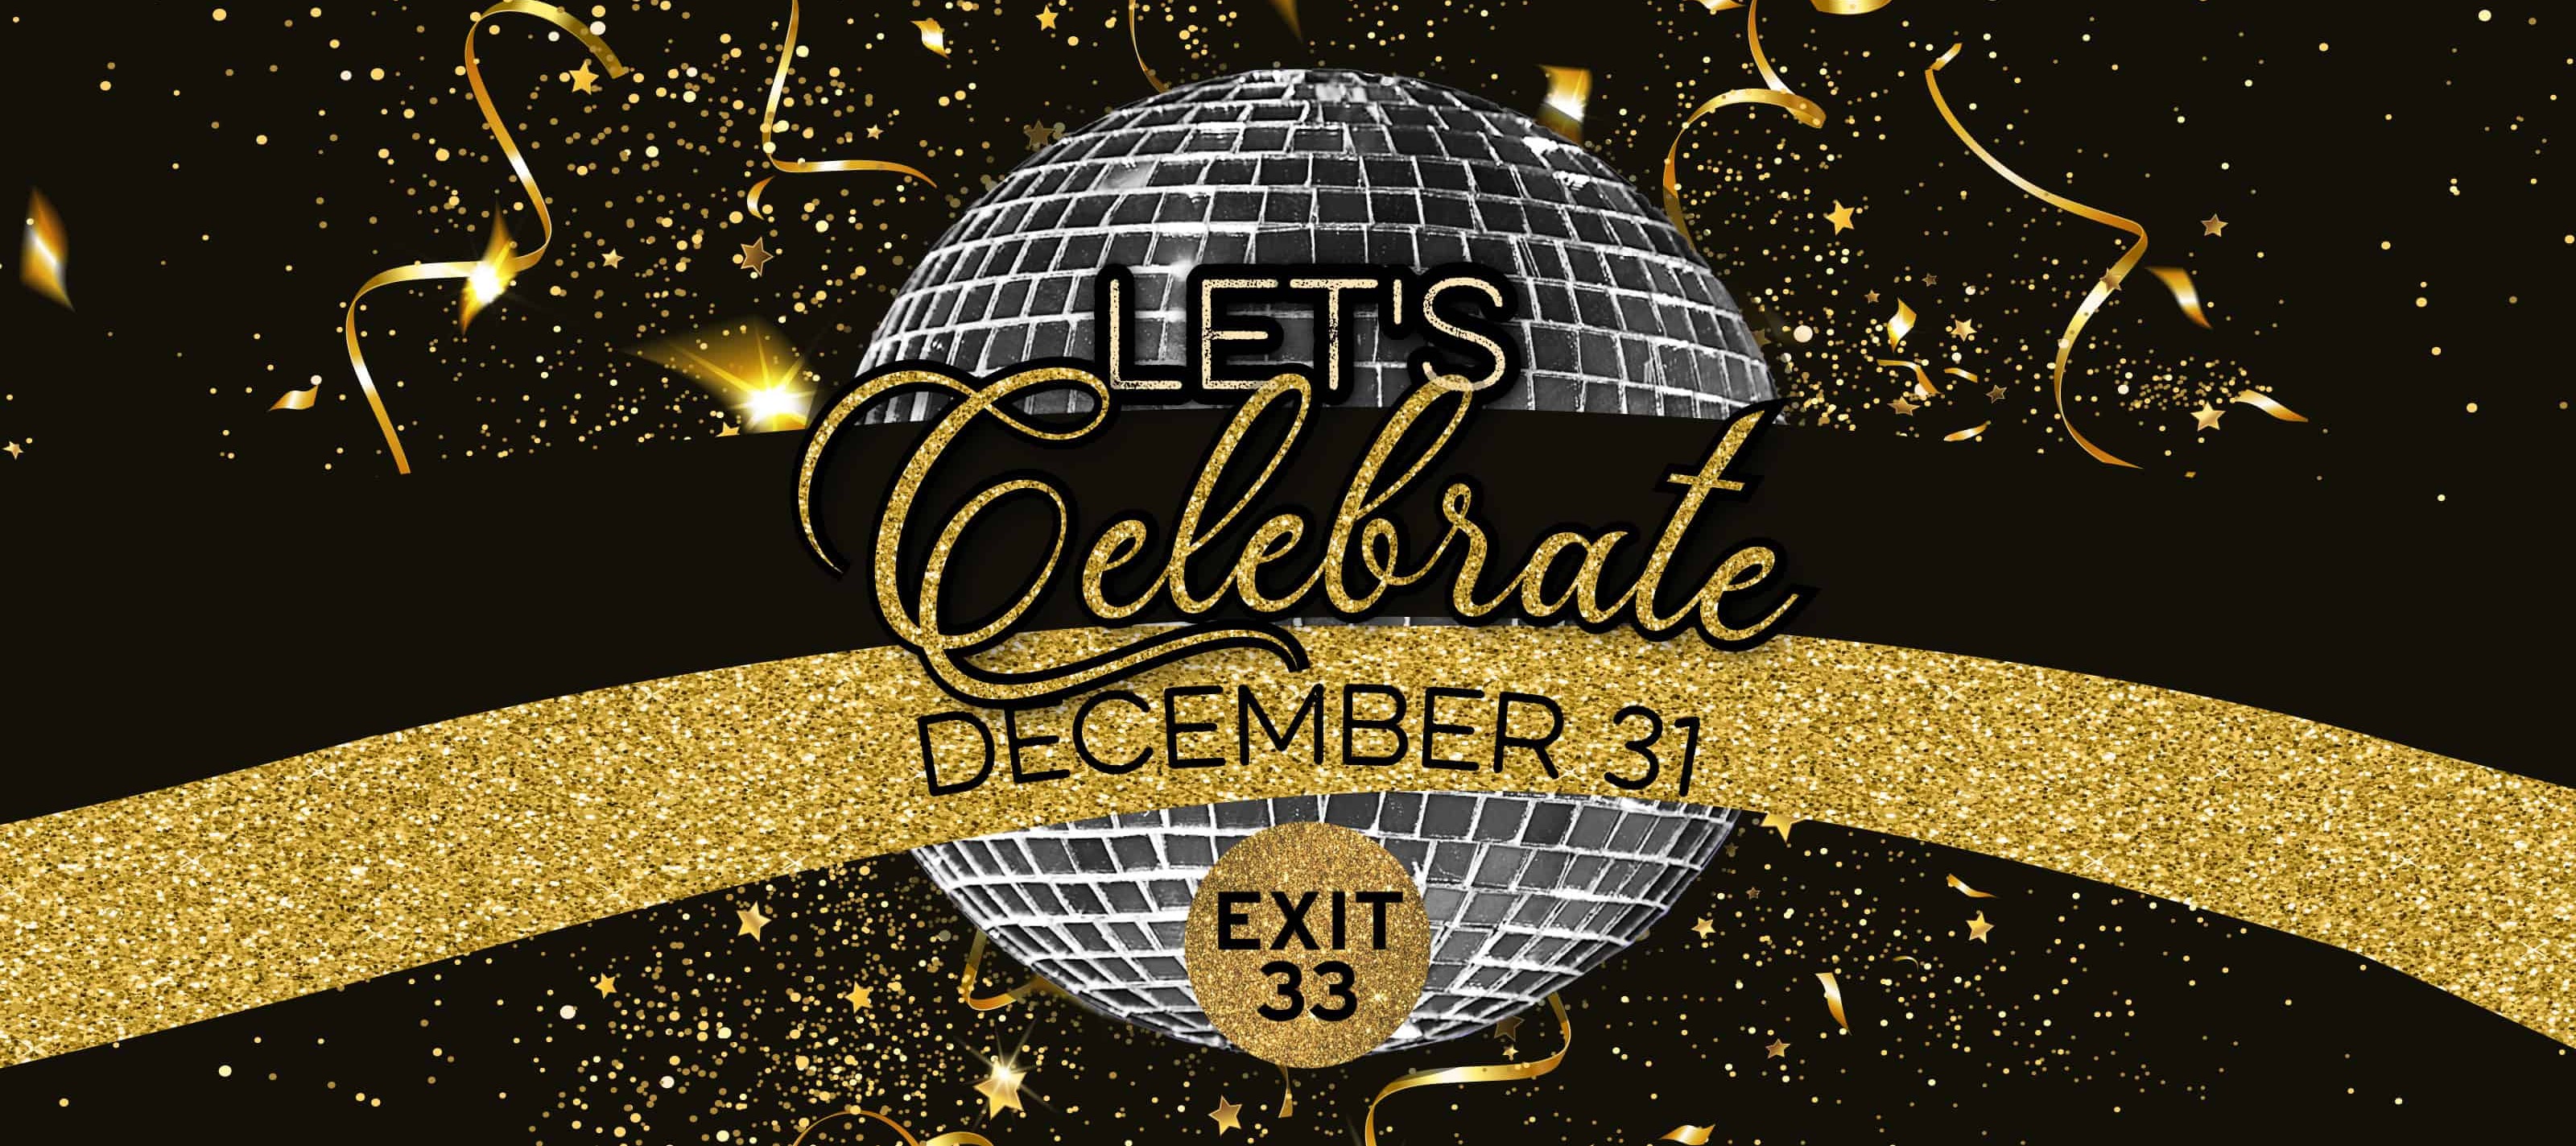 Black and gold glitter promotional image for New Years Eve at Exit 33 on December 31